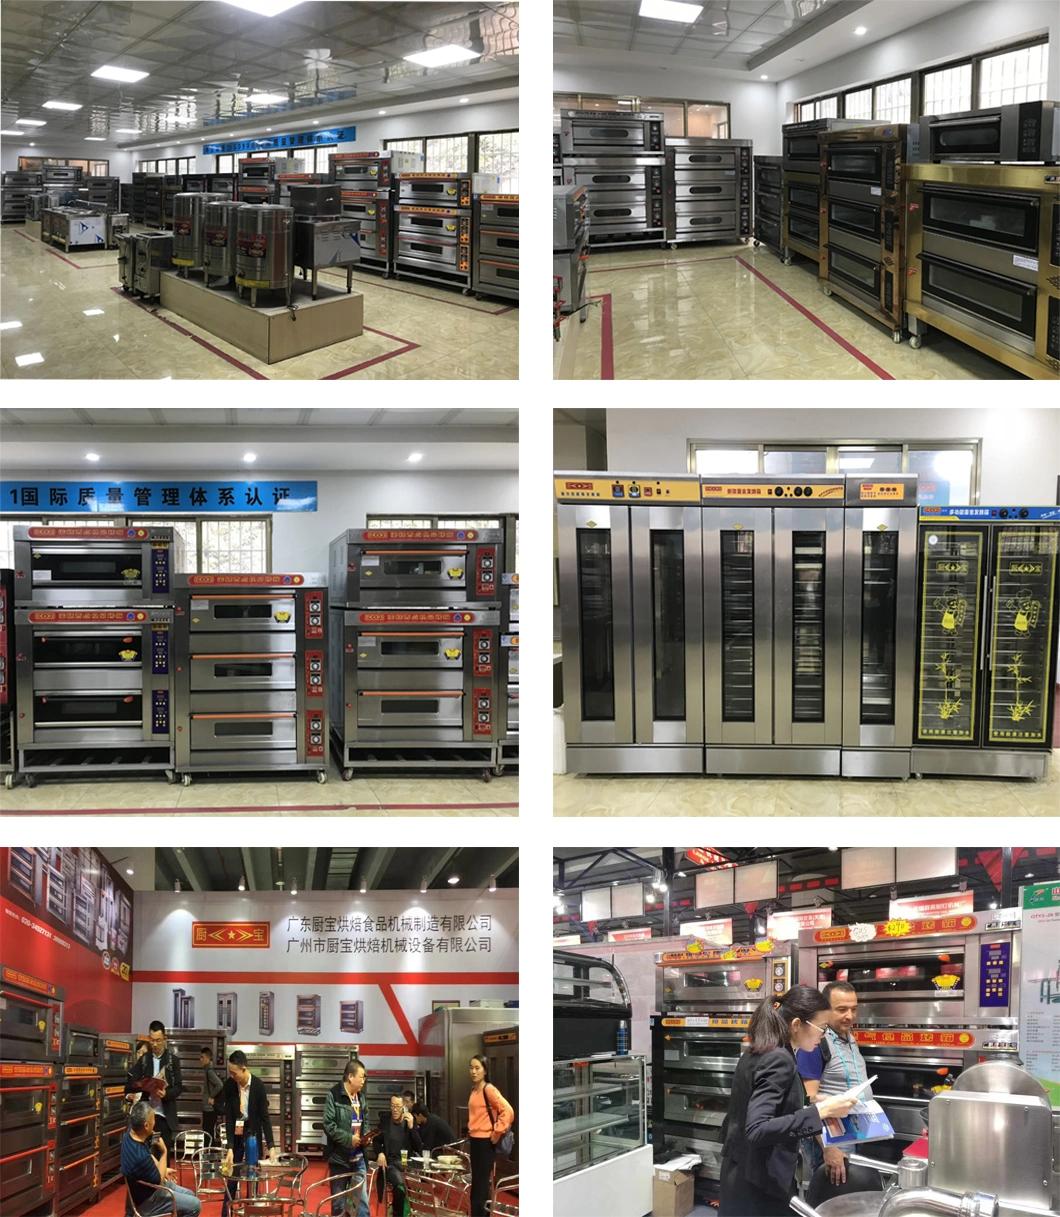 Commercial Kitchen 3 Deck 6 Trays Gas Oven for Restaurant Baking Machine Bakery Machinery Food Equipment